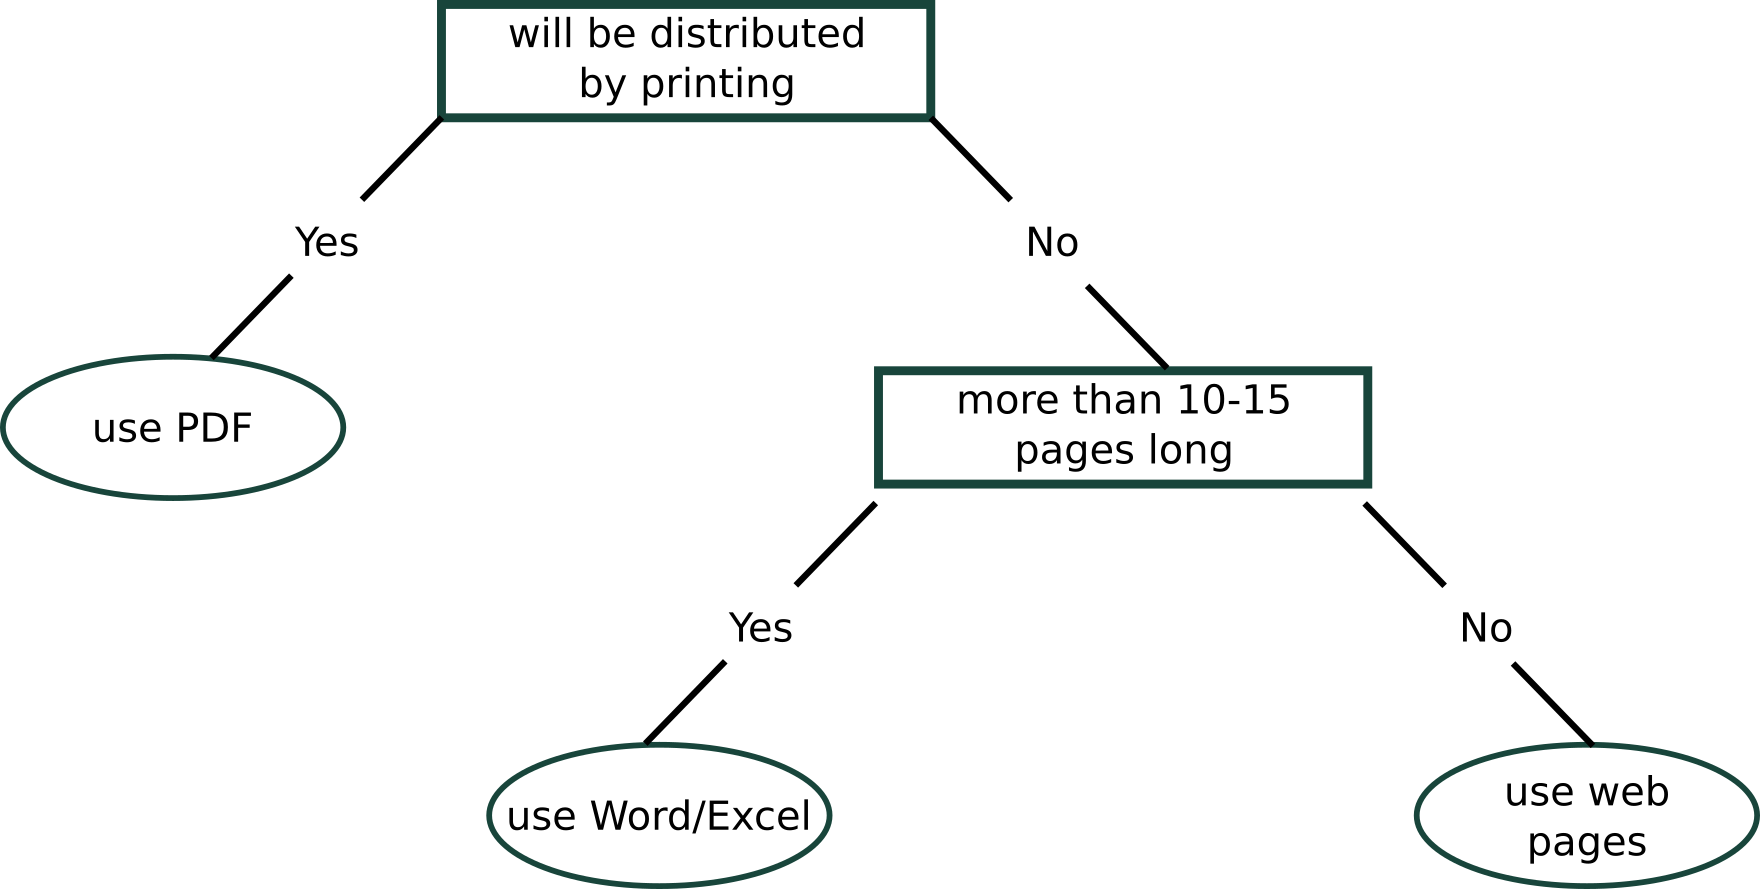 decision tree showing that printed documents should be created as PDFs, long documents as native formats like Word and Excel, and all other documents as web pages